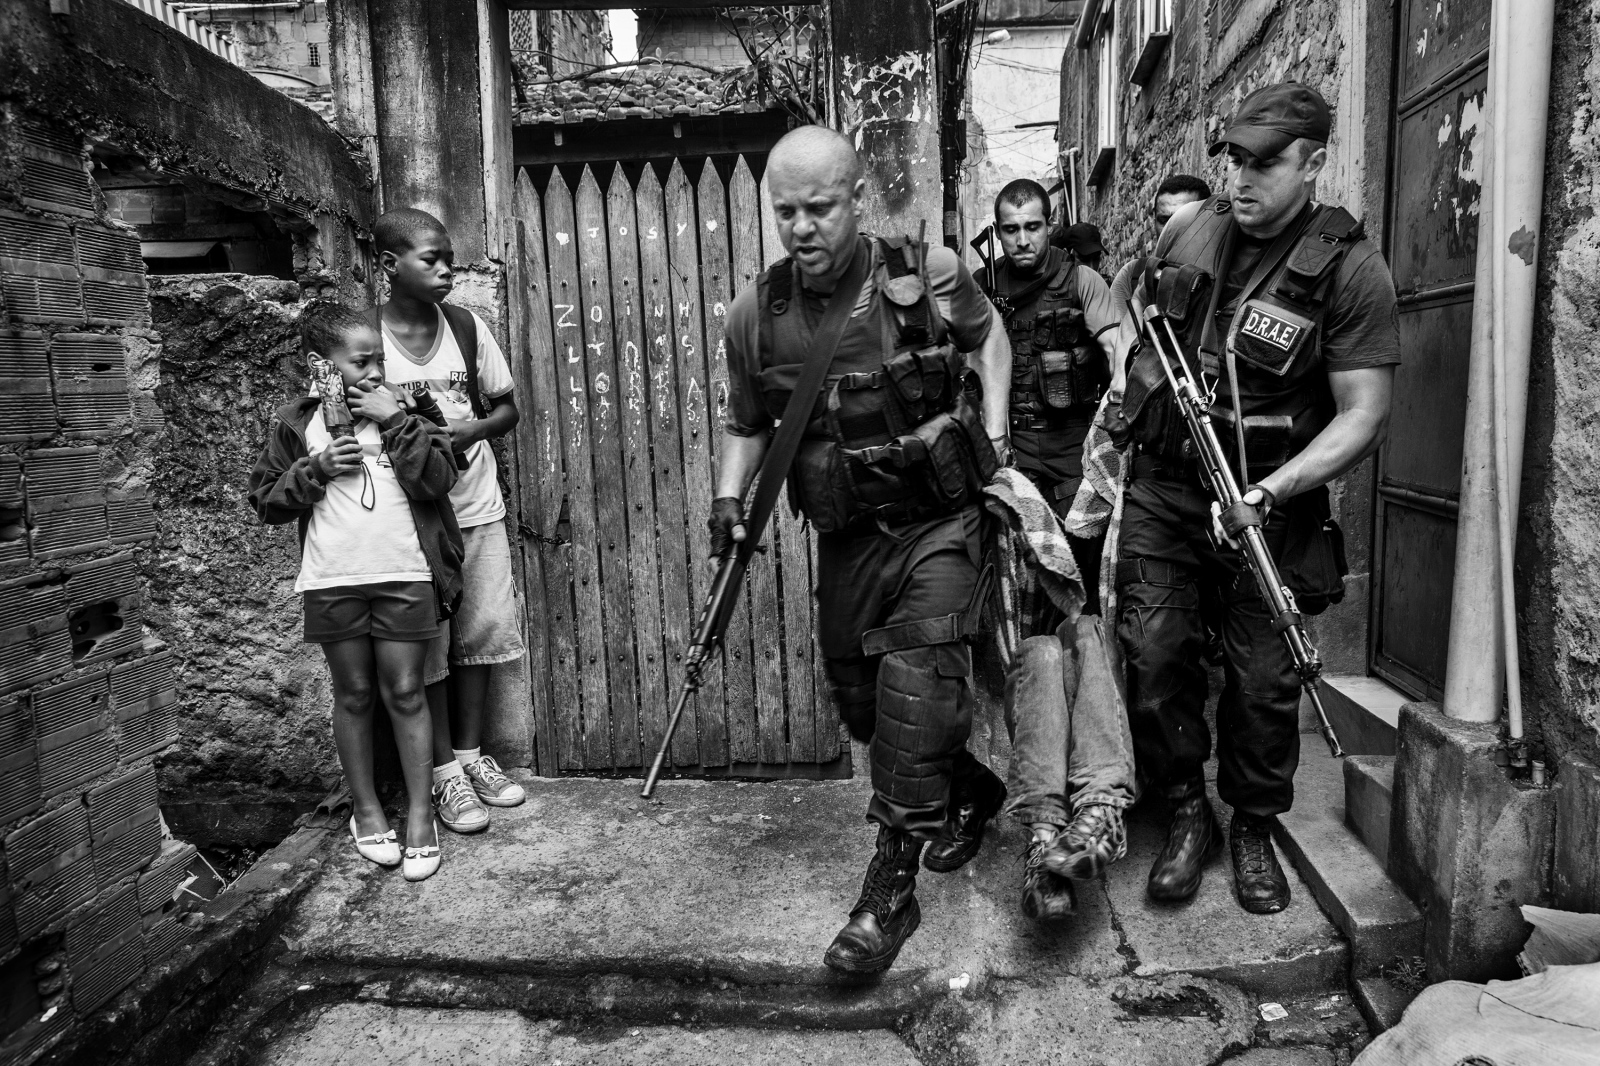  Policemen from DRAE (Civilian Police division against weapons and explosives in Portuguese)...